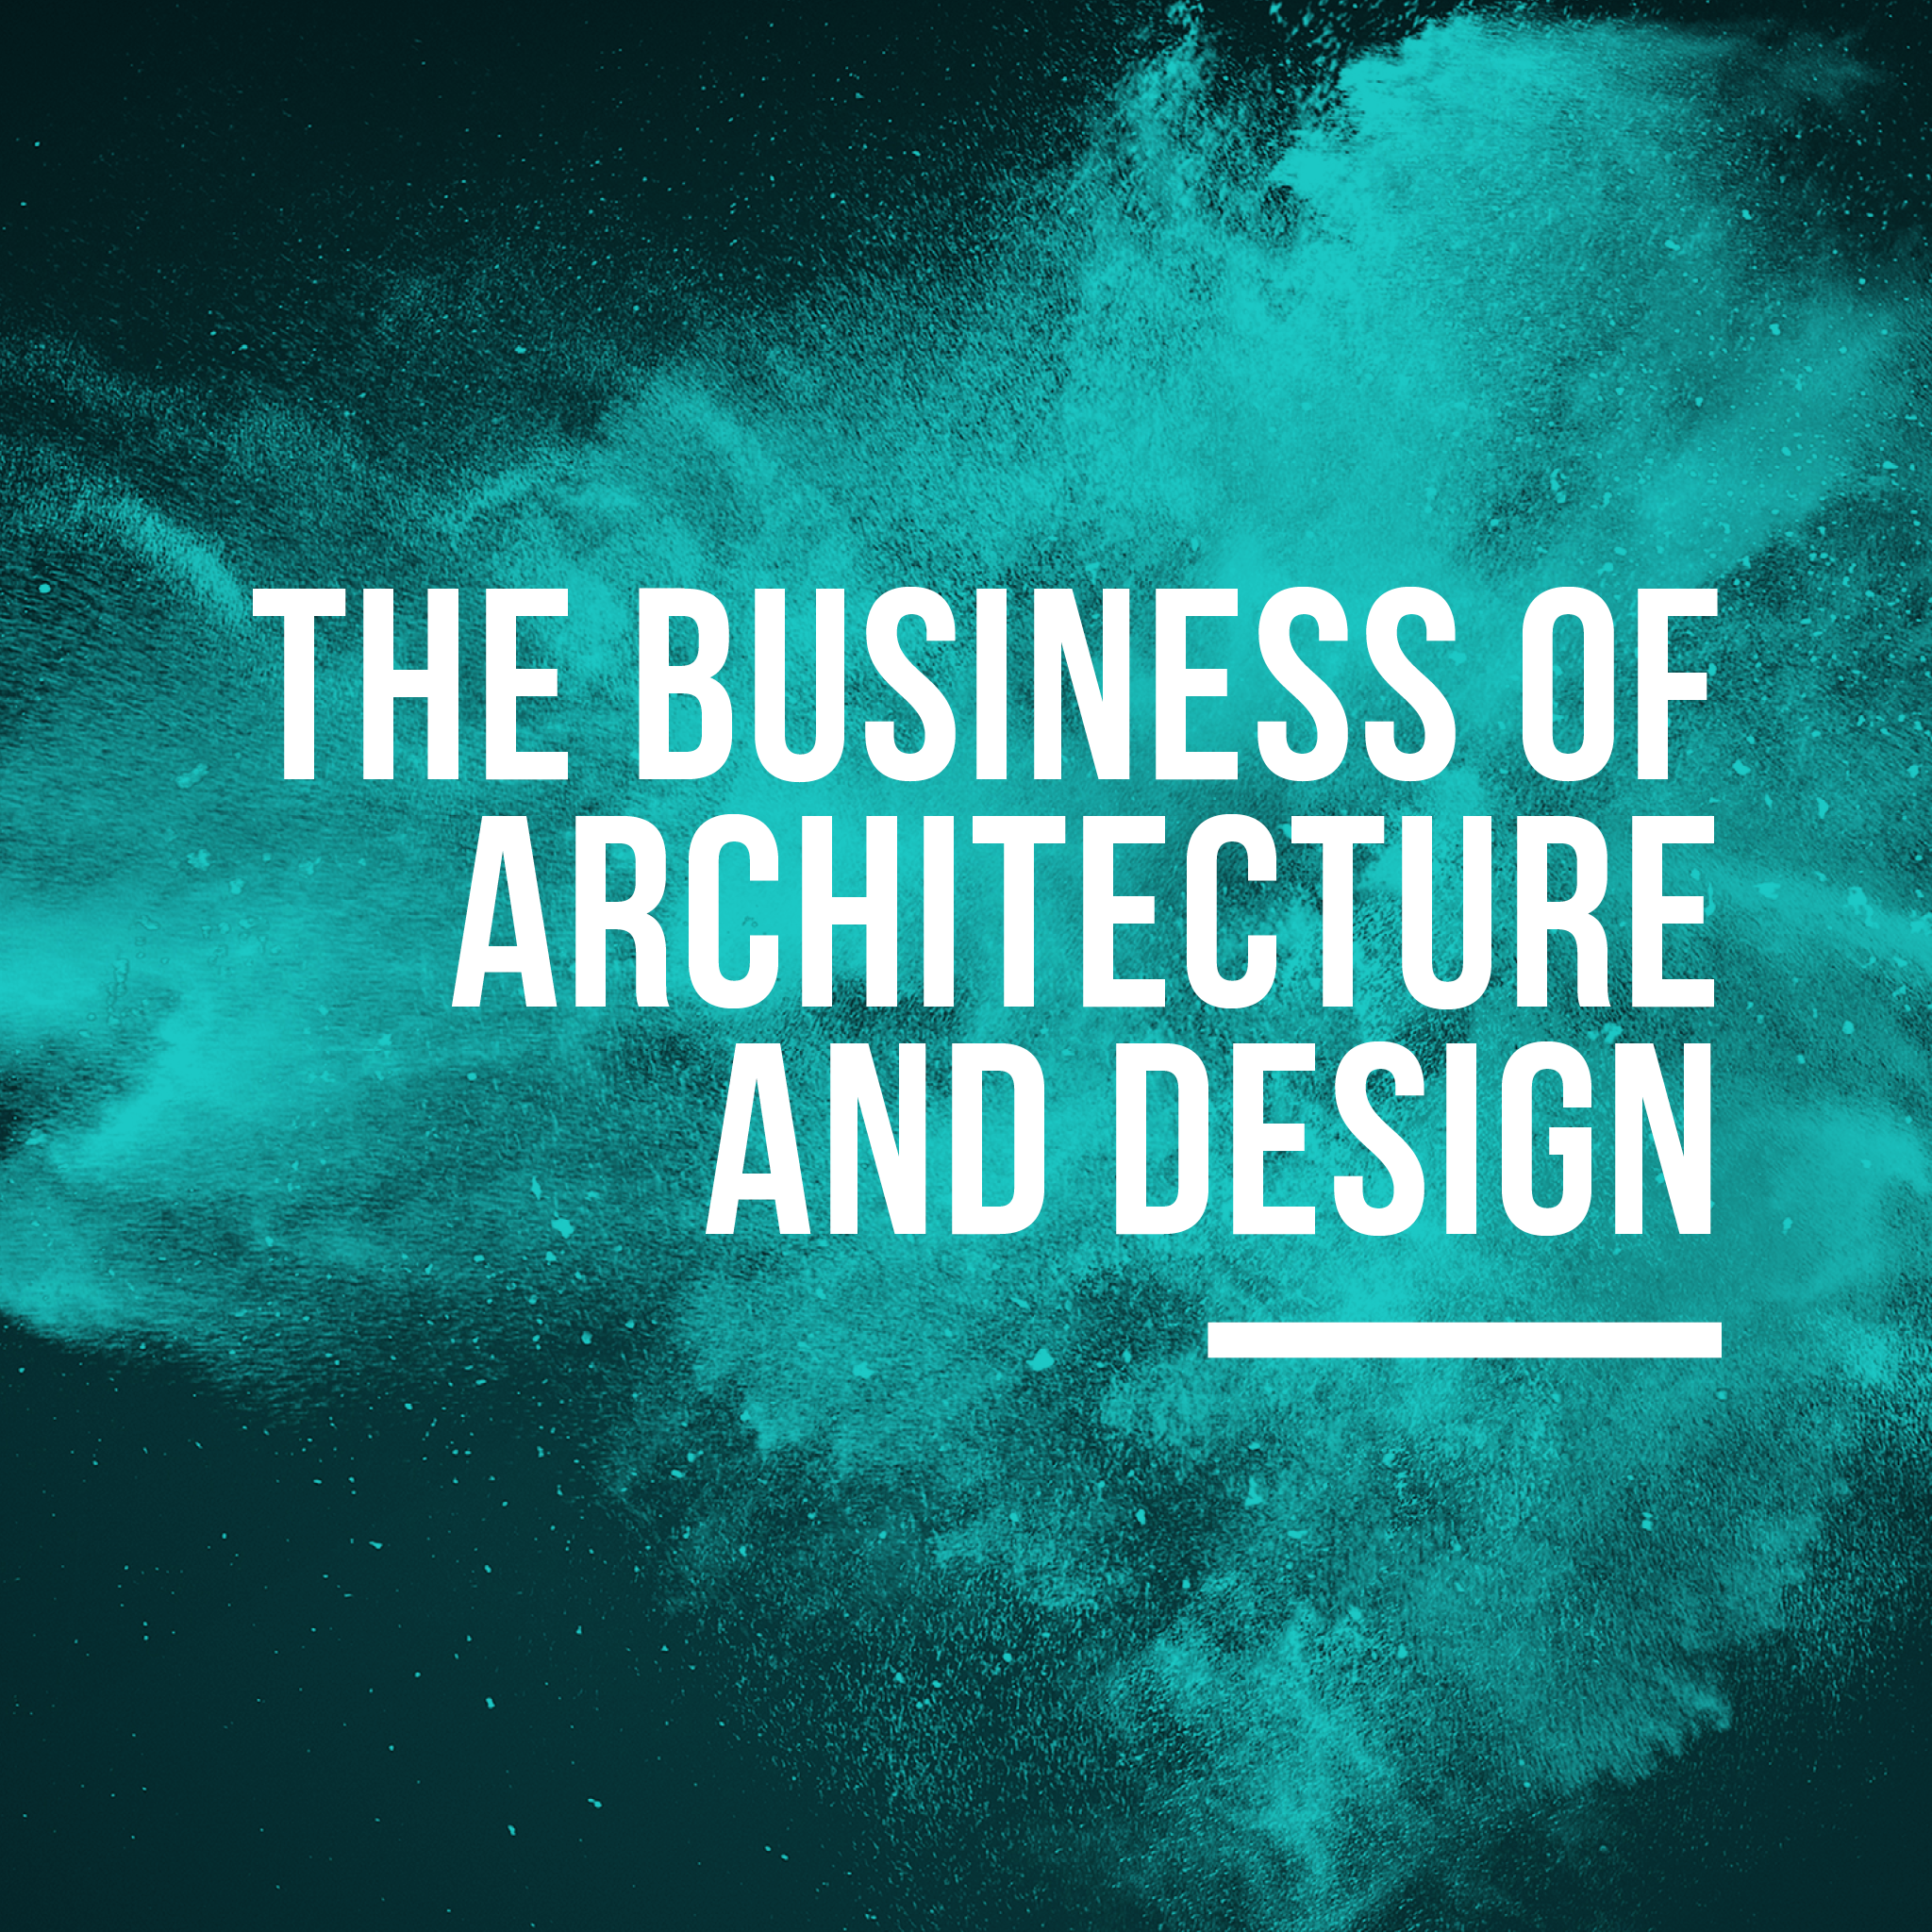 The Business of Architecture and Design